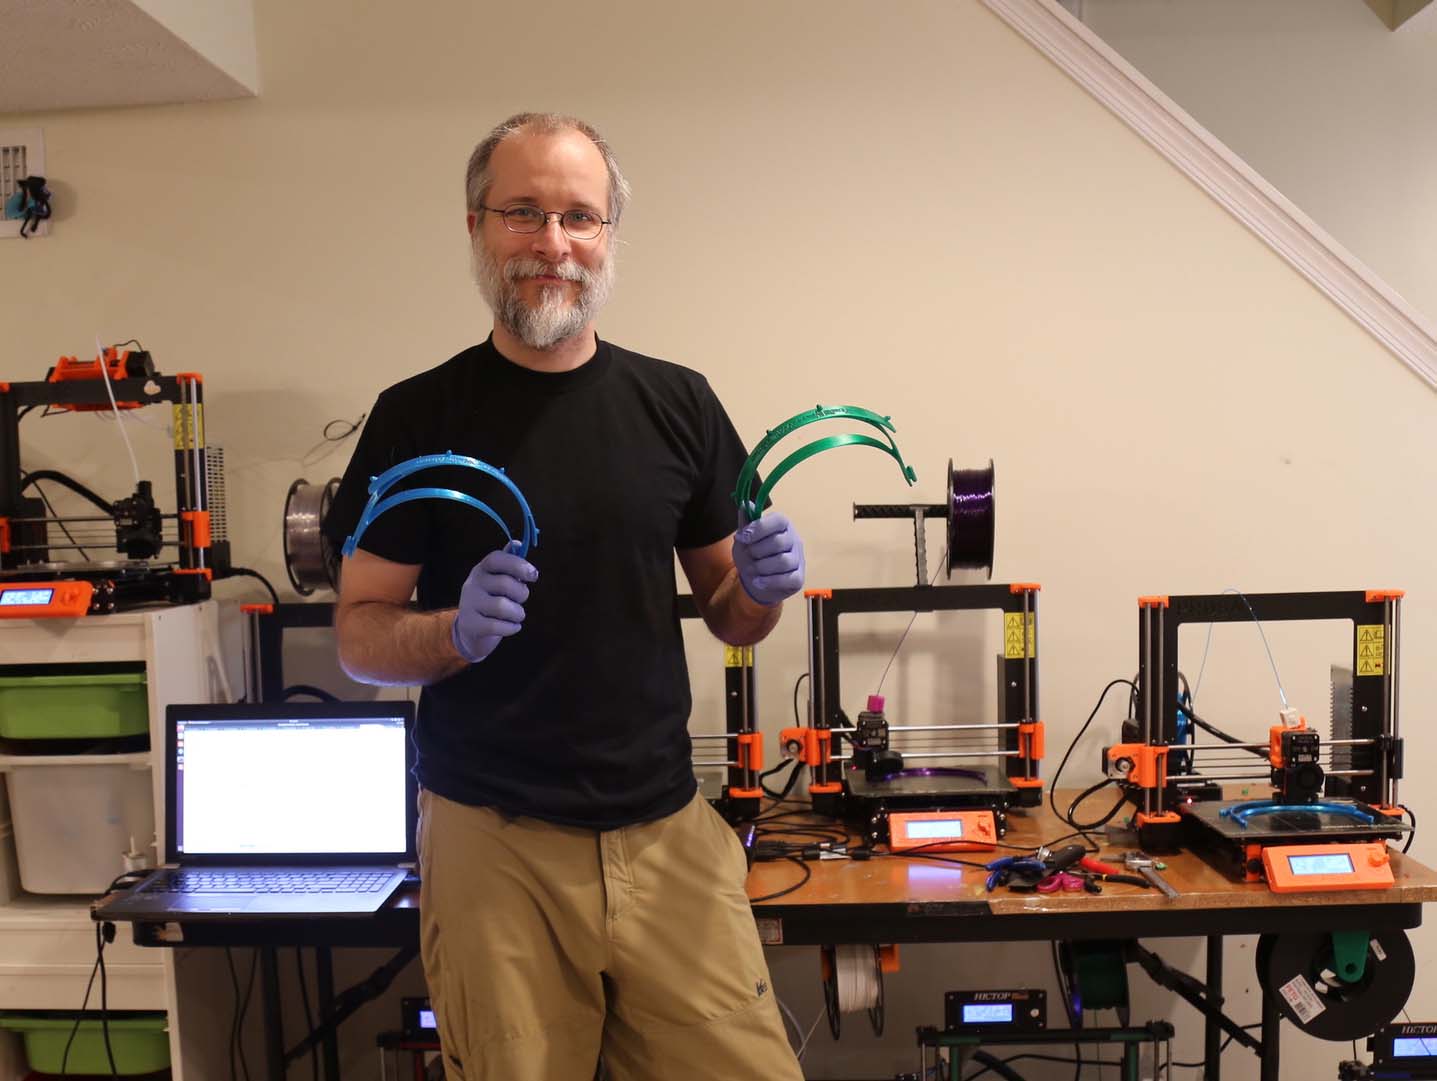 UMD associate professor of chemistry and biochemistry Paul Paukstelis in his basement with an array of 3D printers and the face shield headbands he makes and donates to keep healthcare workers safe during the COVID-19 pandemic. Click image to download hi-res version.
